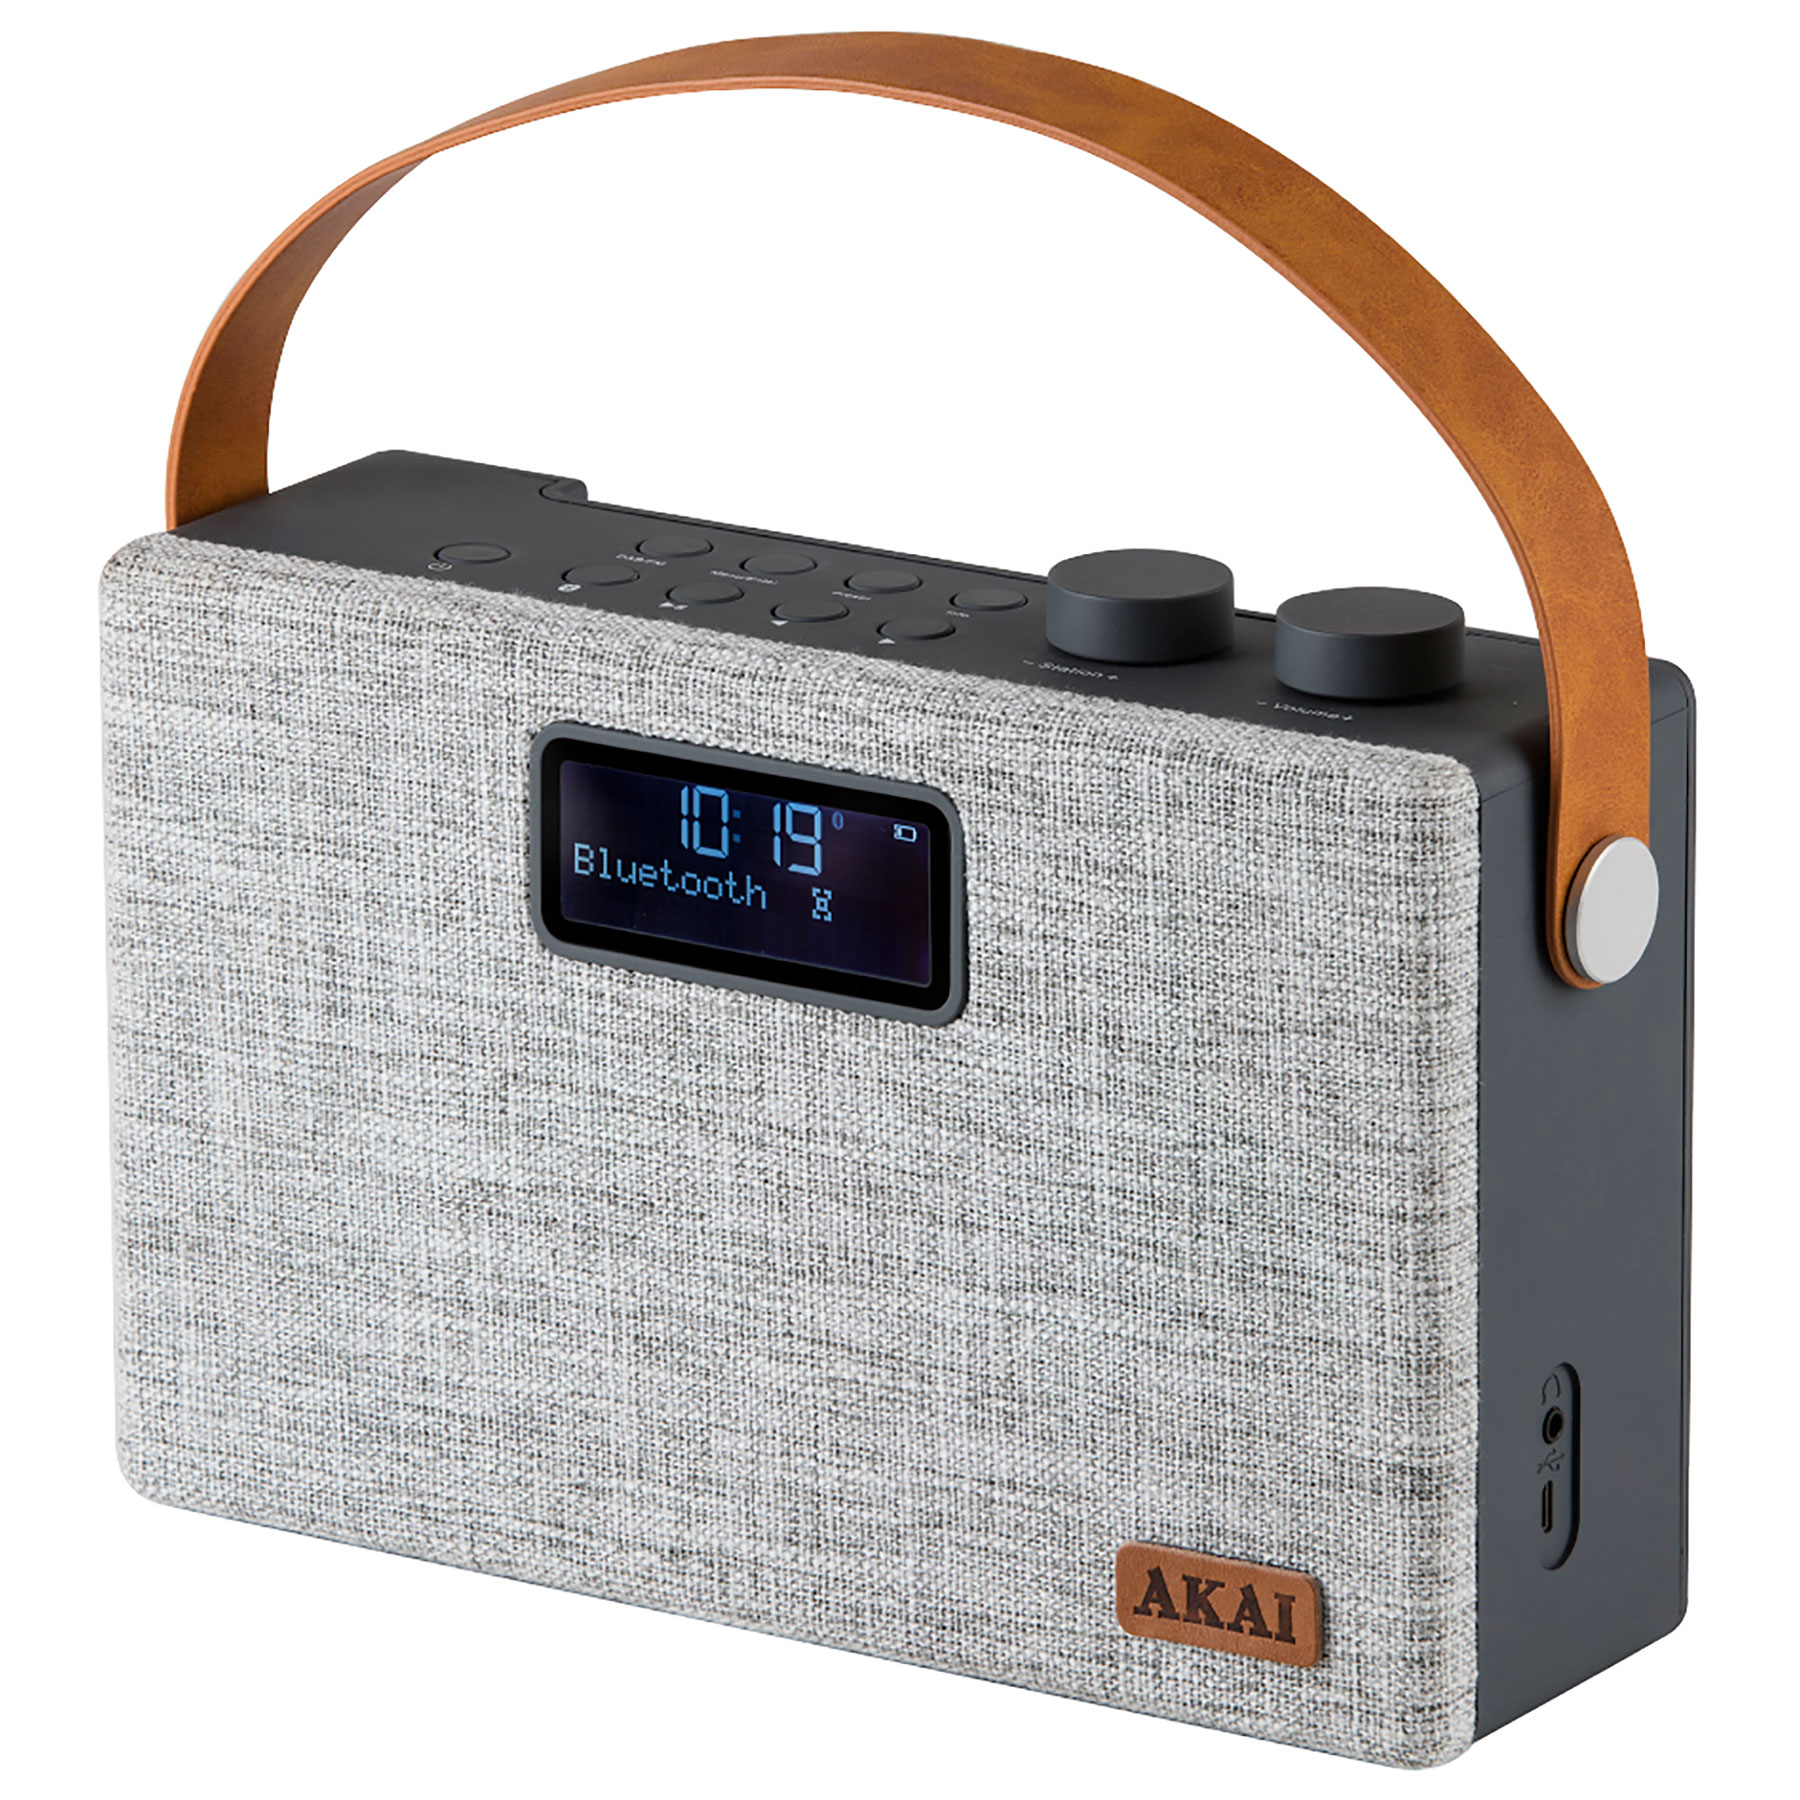 Image of Akai A61029 Sonisk Bluetooth Rechargeable DAB FM Radio Grey